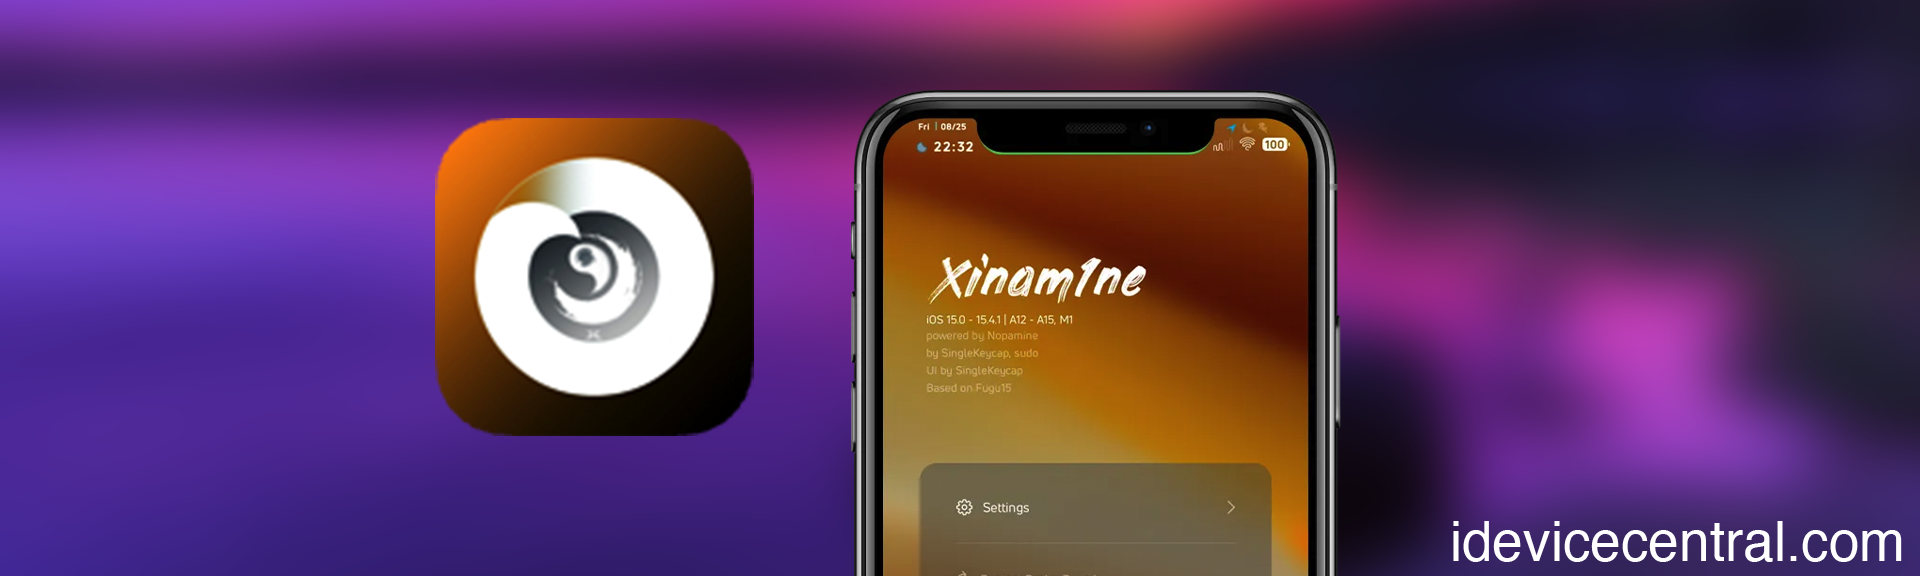 Xinam1ne Jailbreak for iOS 15.0 - 16.5.1 With Support for Old Tweaks (A12-A15)